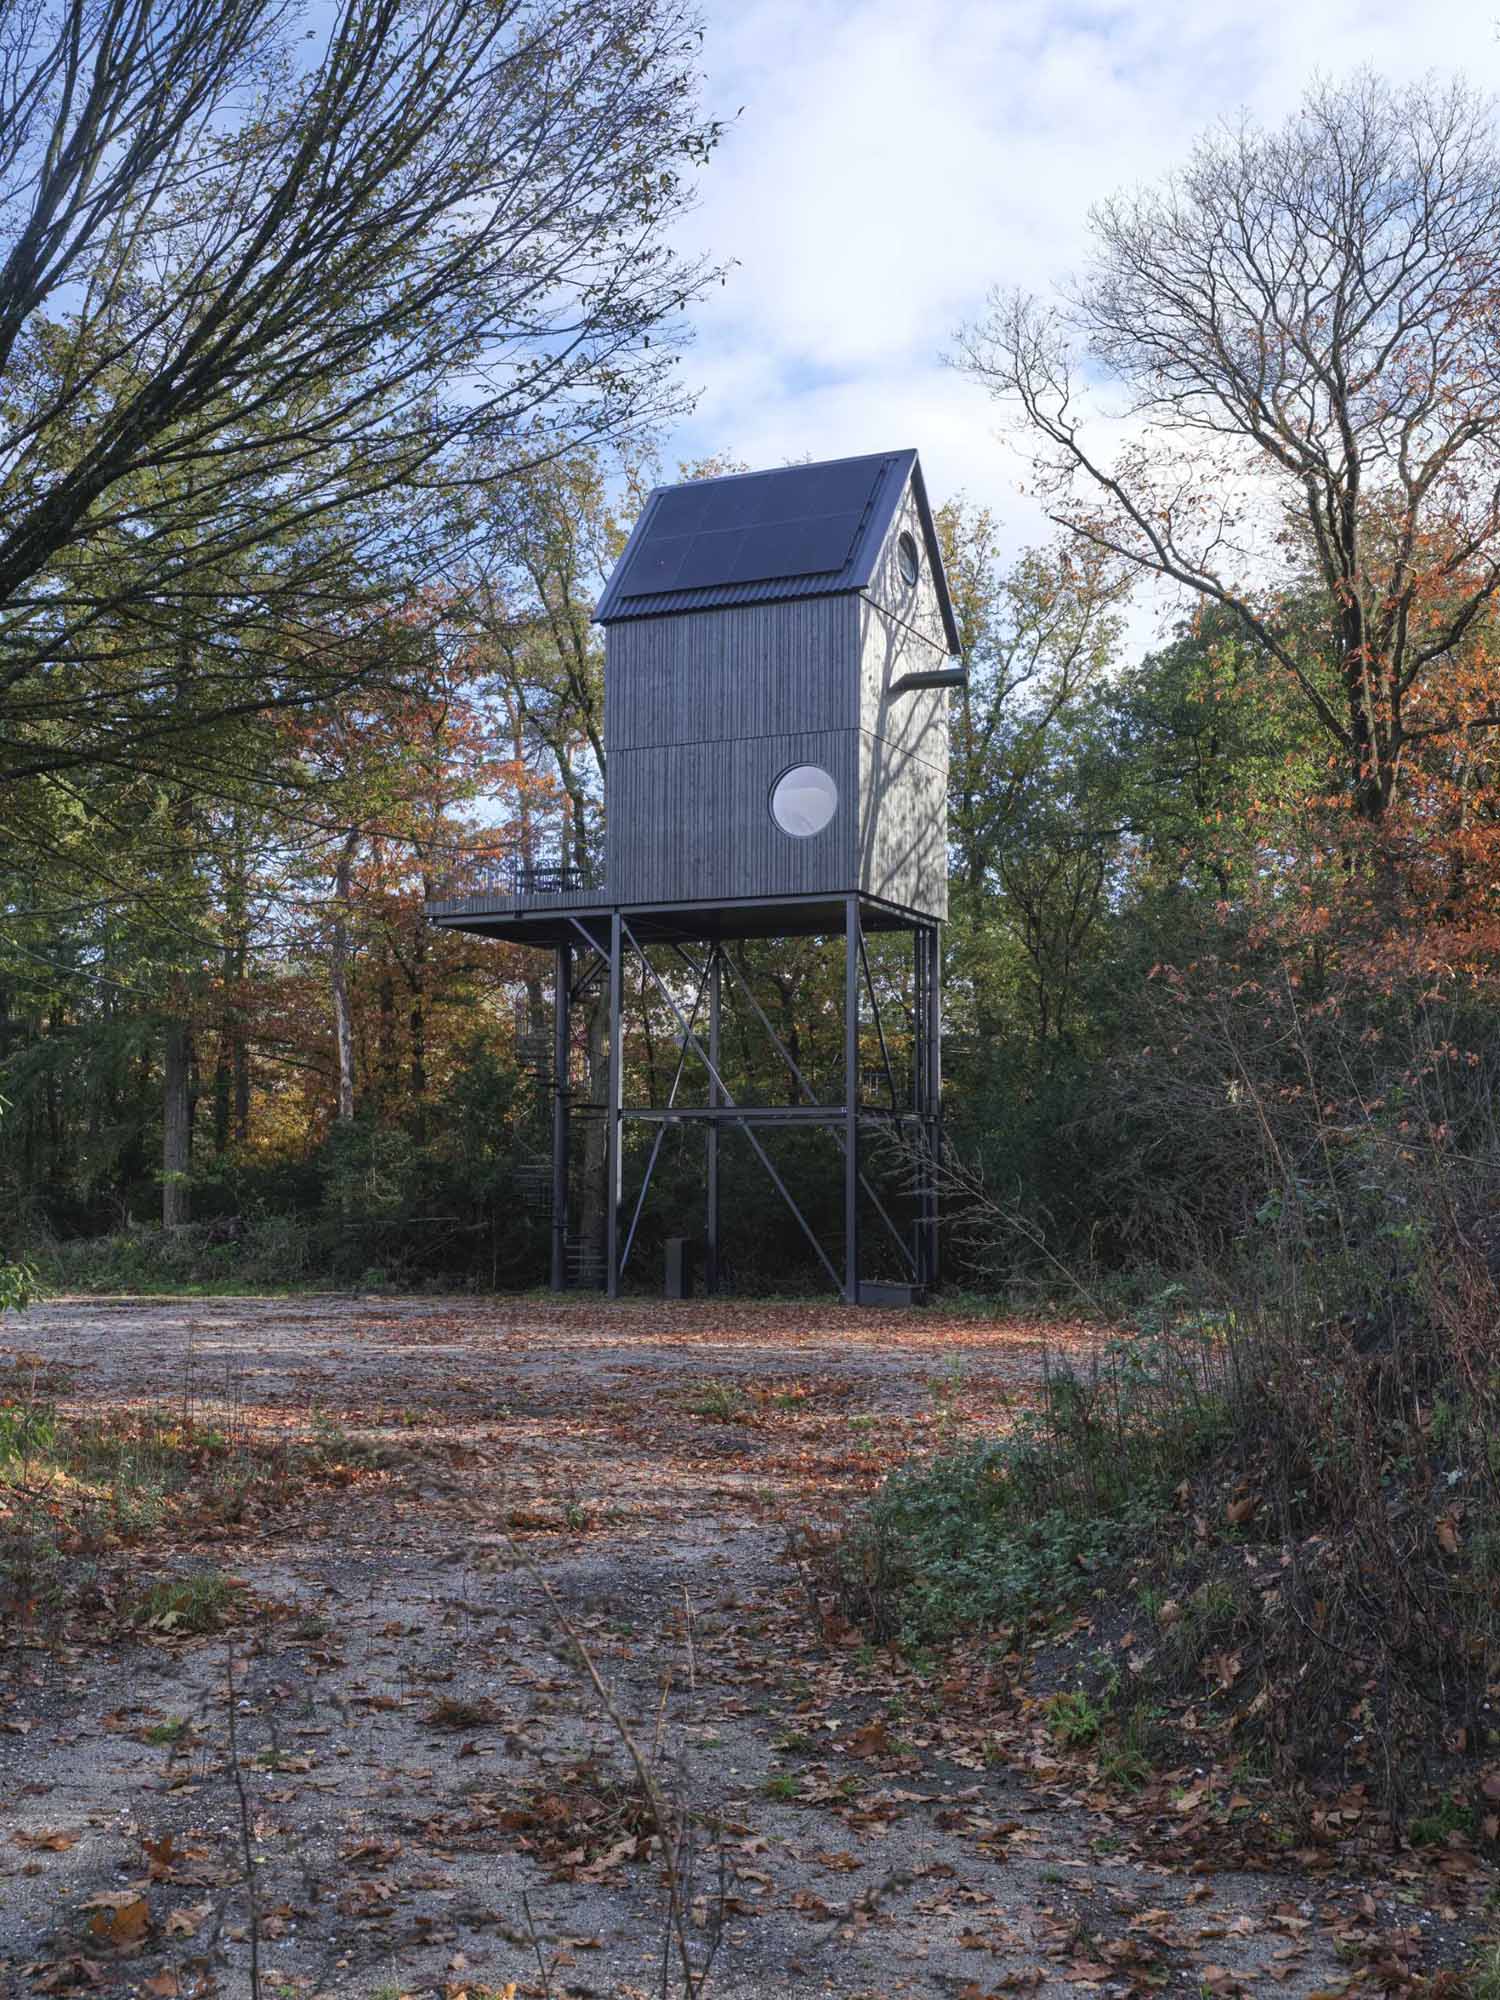 A small cabin that's designed as a multi-level elevated bird house.